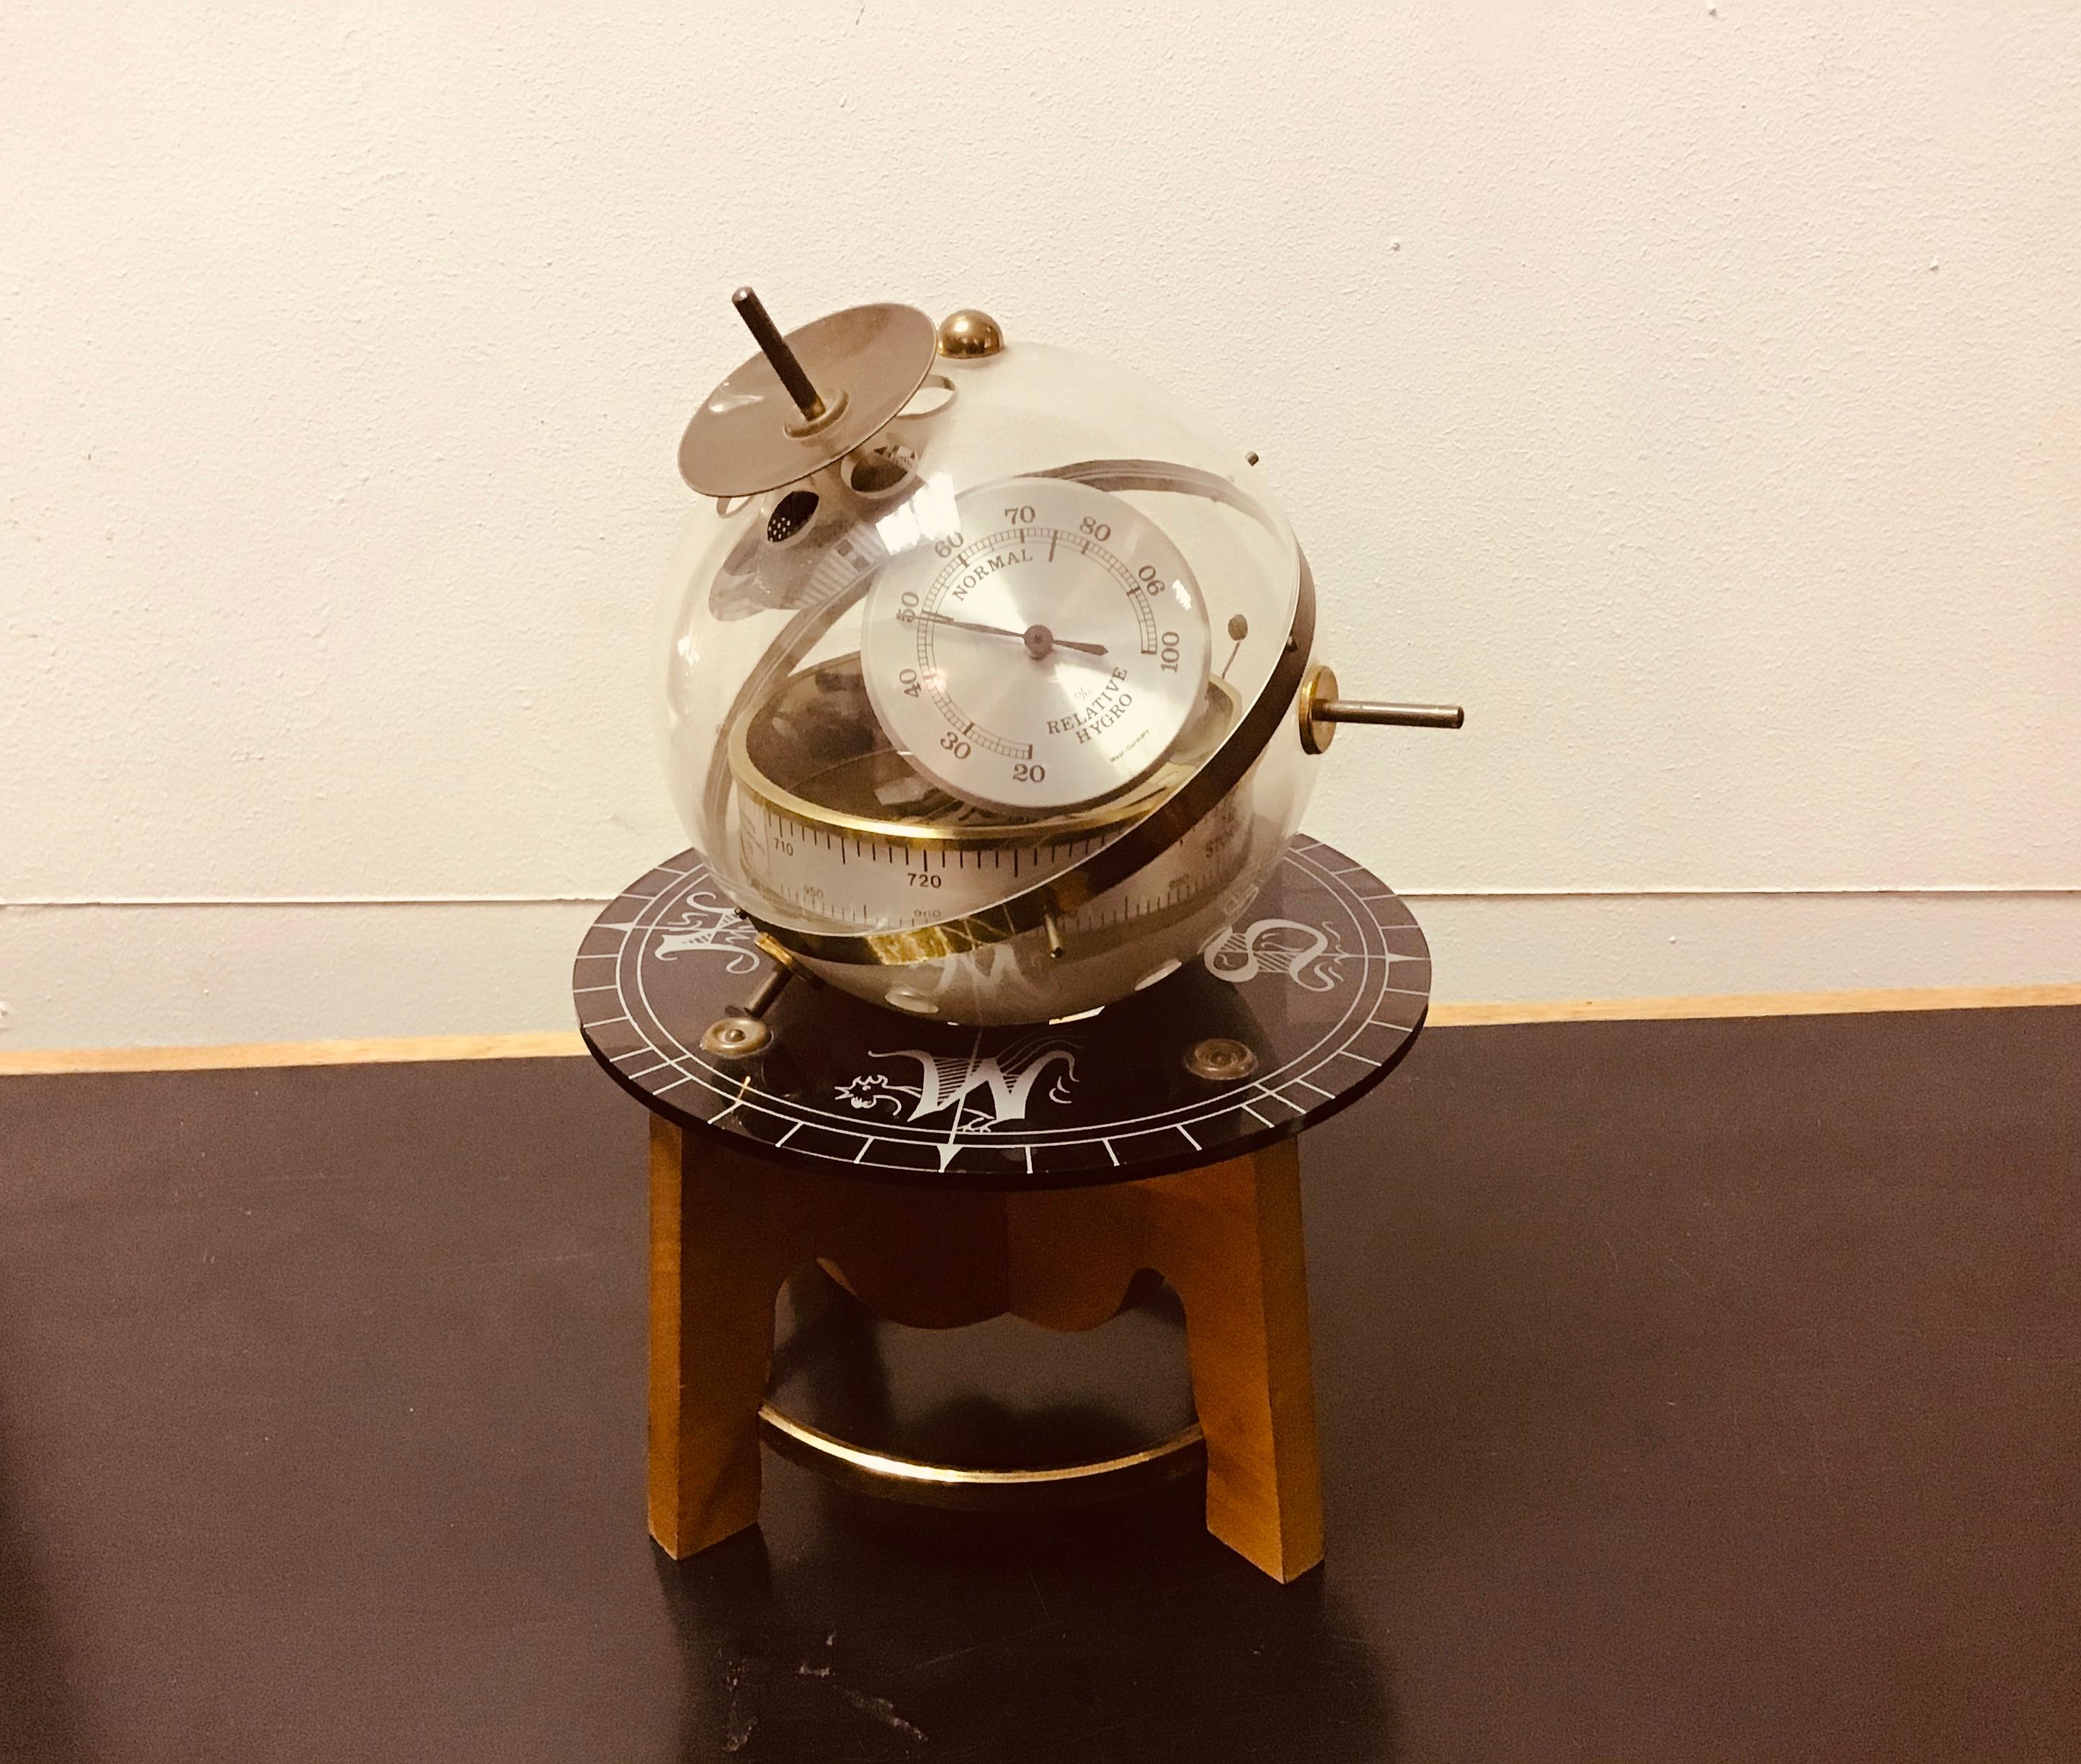 Fantastic object Sputnik table Barometer, Hygrometer and thermometer
Made with acrylic sphere that rotate on it axis with a wooden and brass base,
 circa 1950s, German.